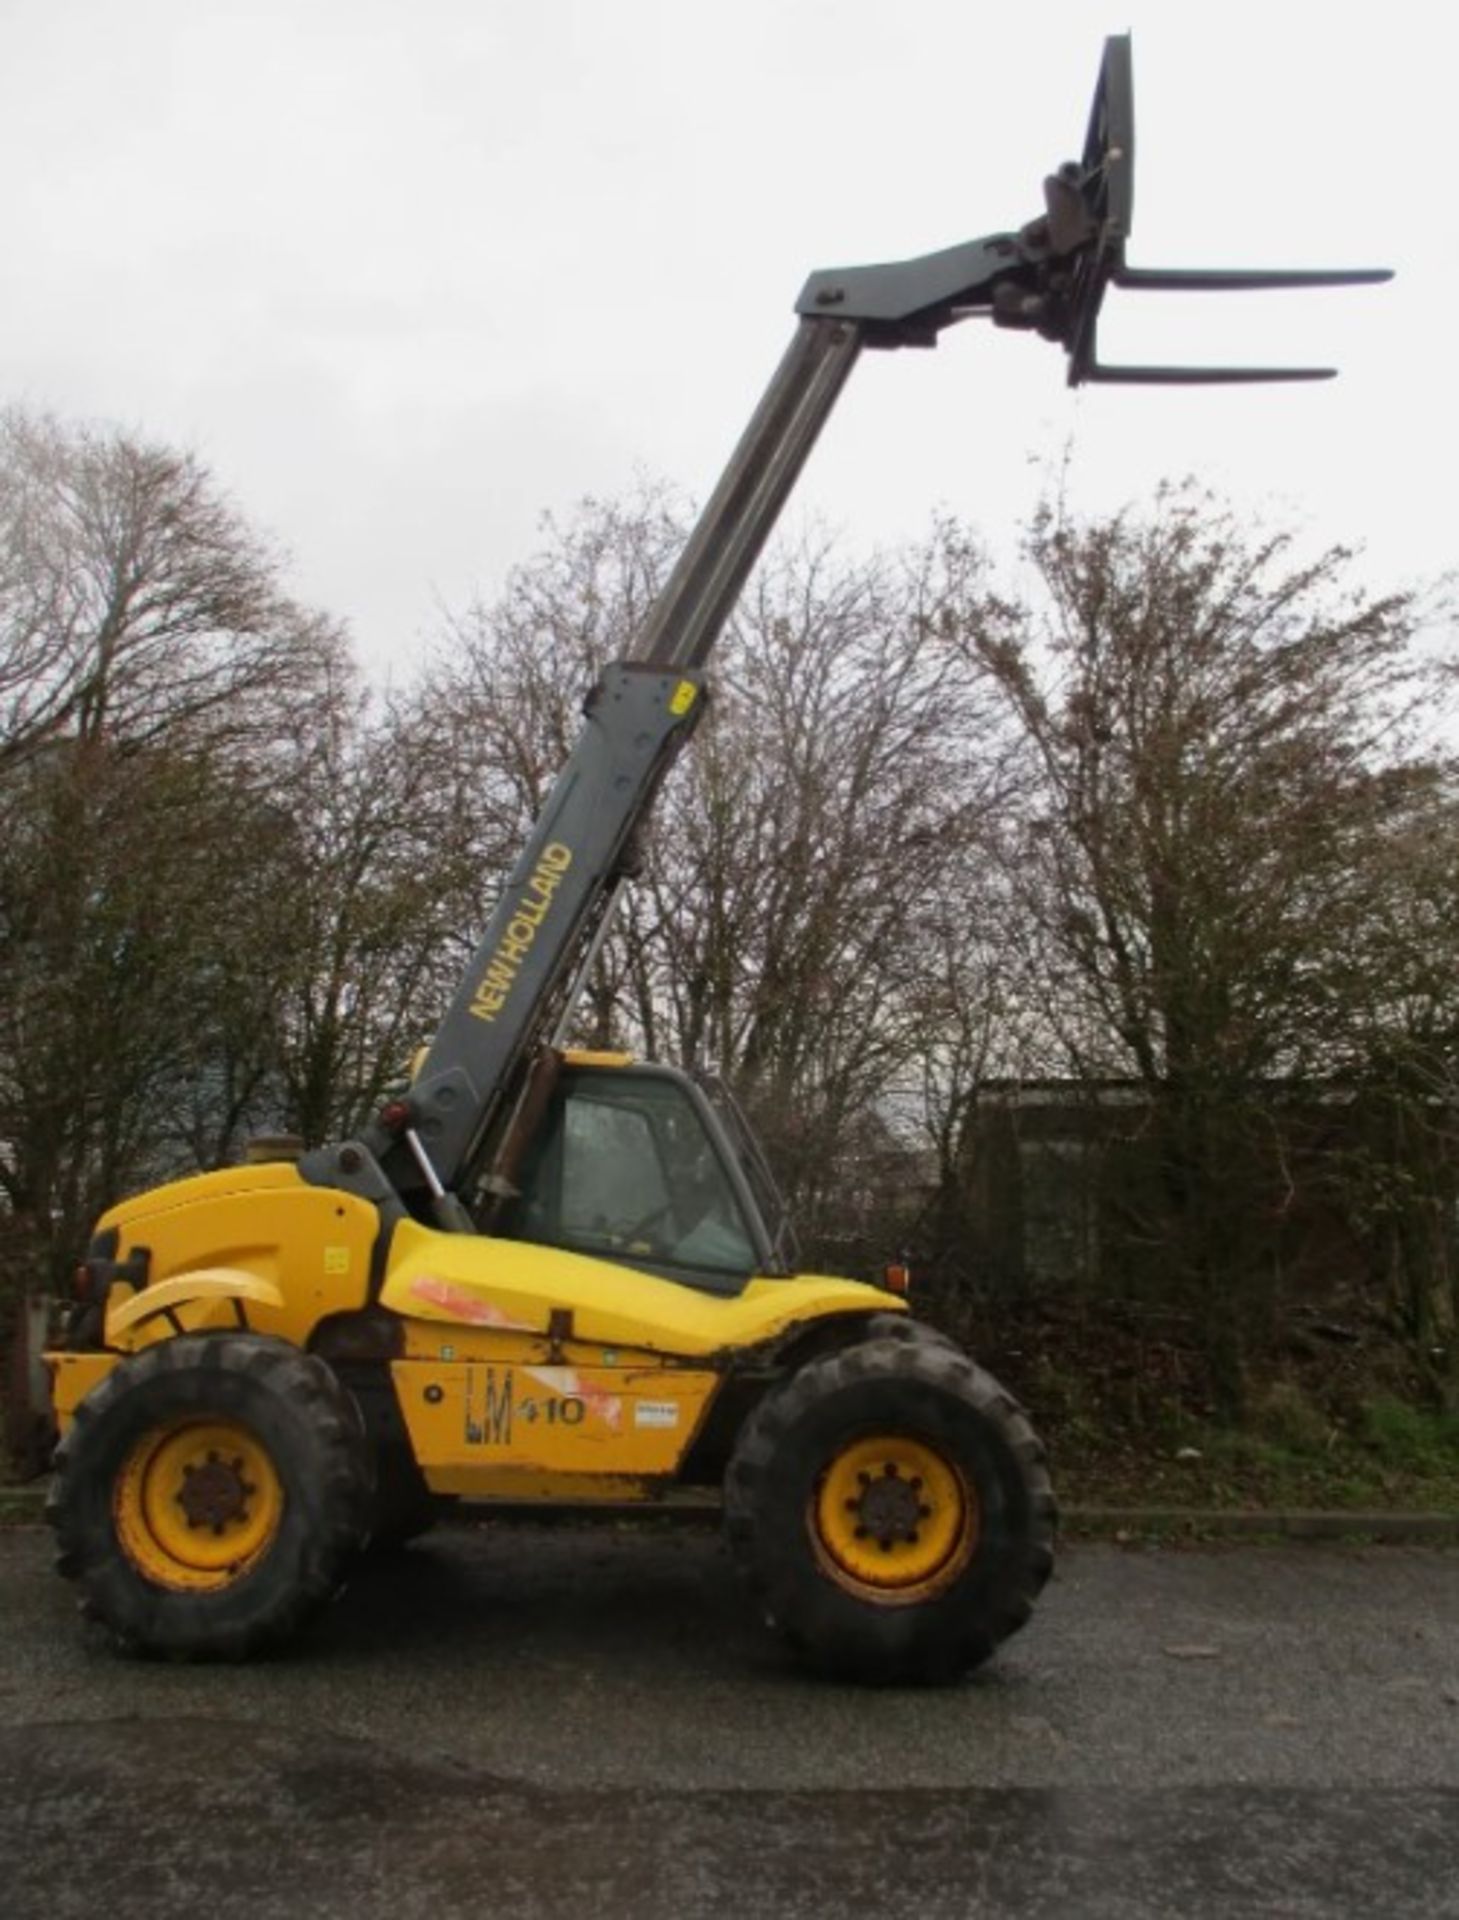 NEW HOLLAND LM410 TELEHANDLER - YOUR RELIABLE SOLUTION FOR HEAVY LIFTING - Image 7 of 11